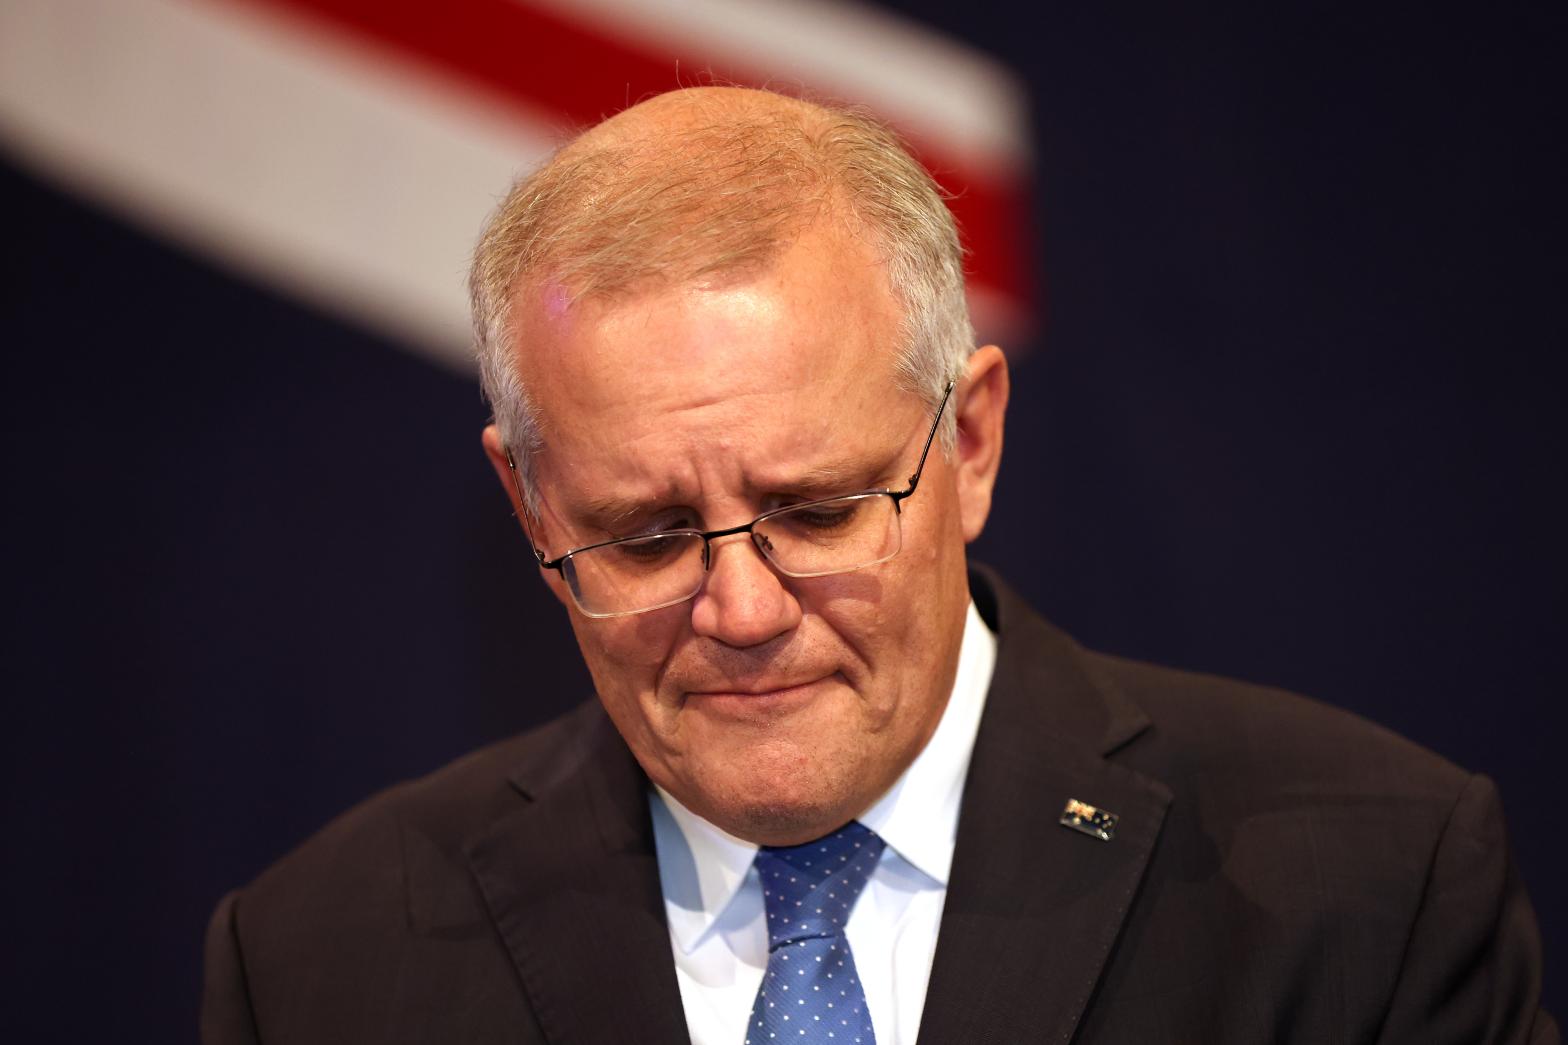 Scott Morrison Reveals He Treated Mental Health Issues With Medication While Prime Minister